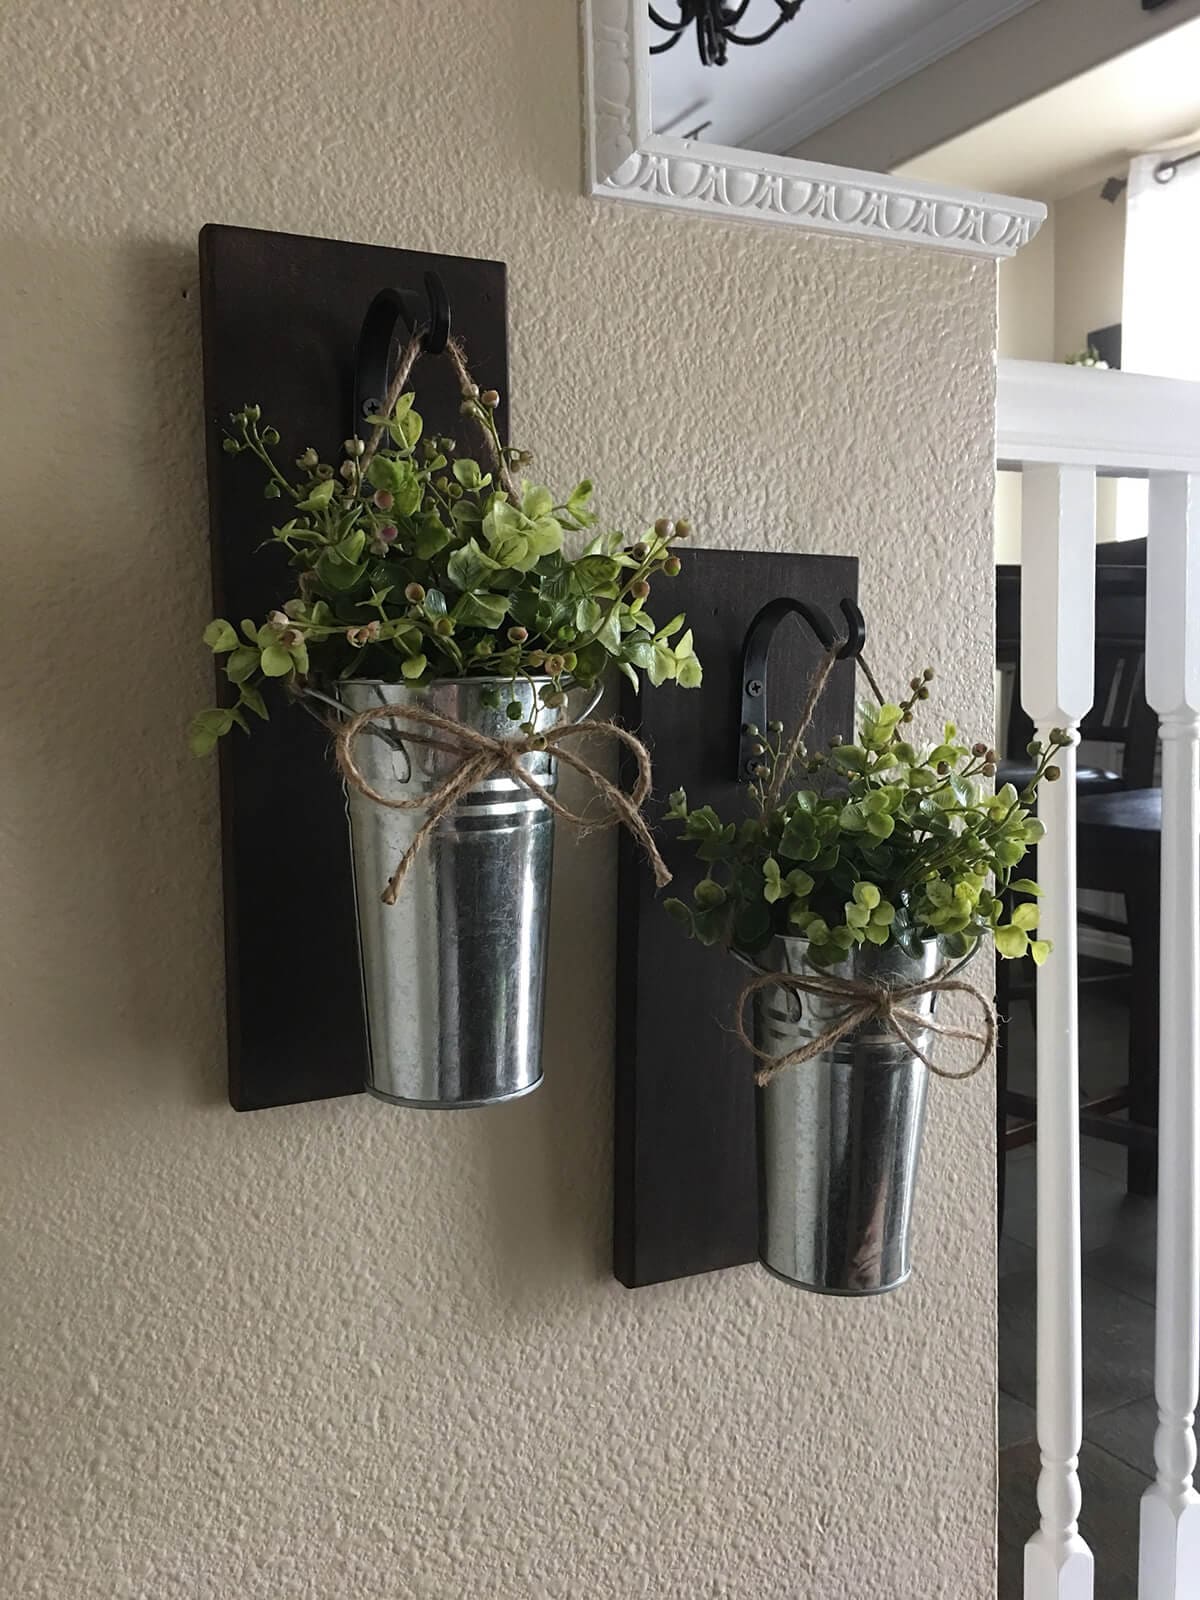 23 impressive hanging vases and planters ideas to decorate your boring wall - 85